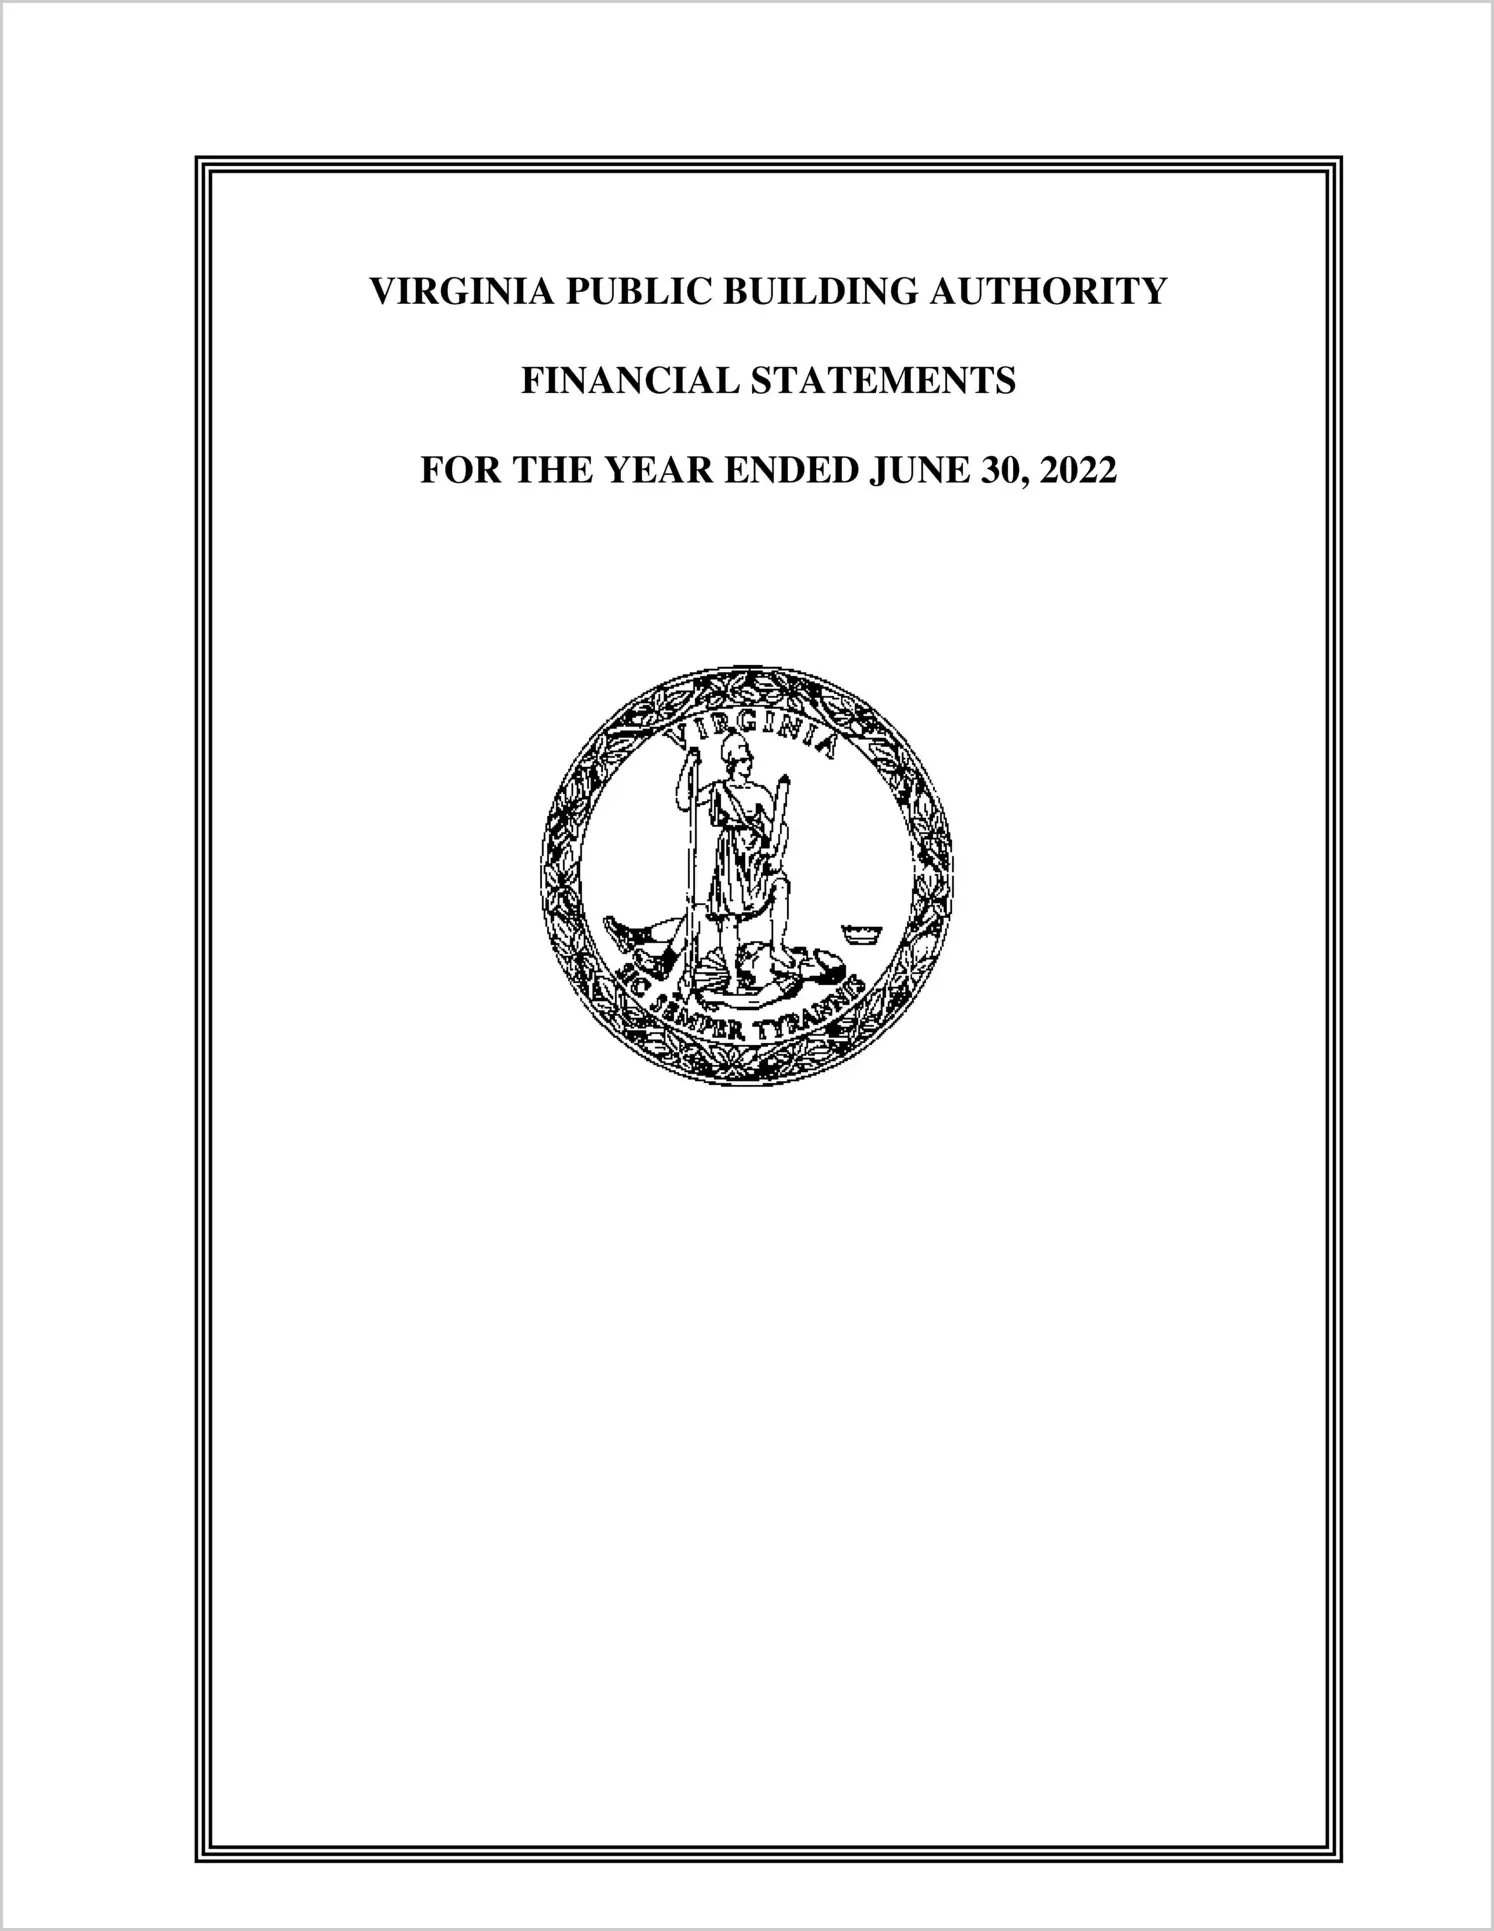 Virginia Public Building Authority Financial Statements for the year ended June 30, 2022